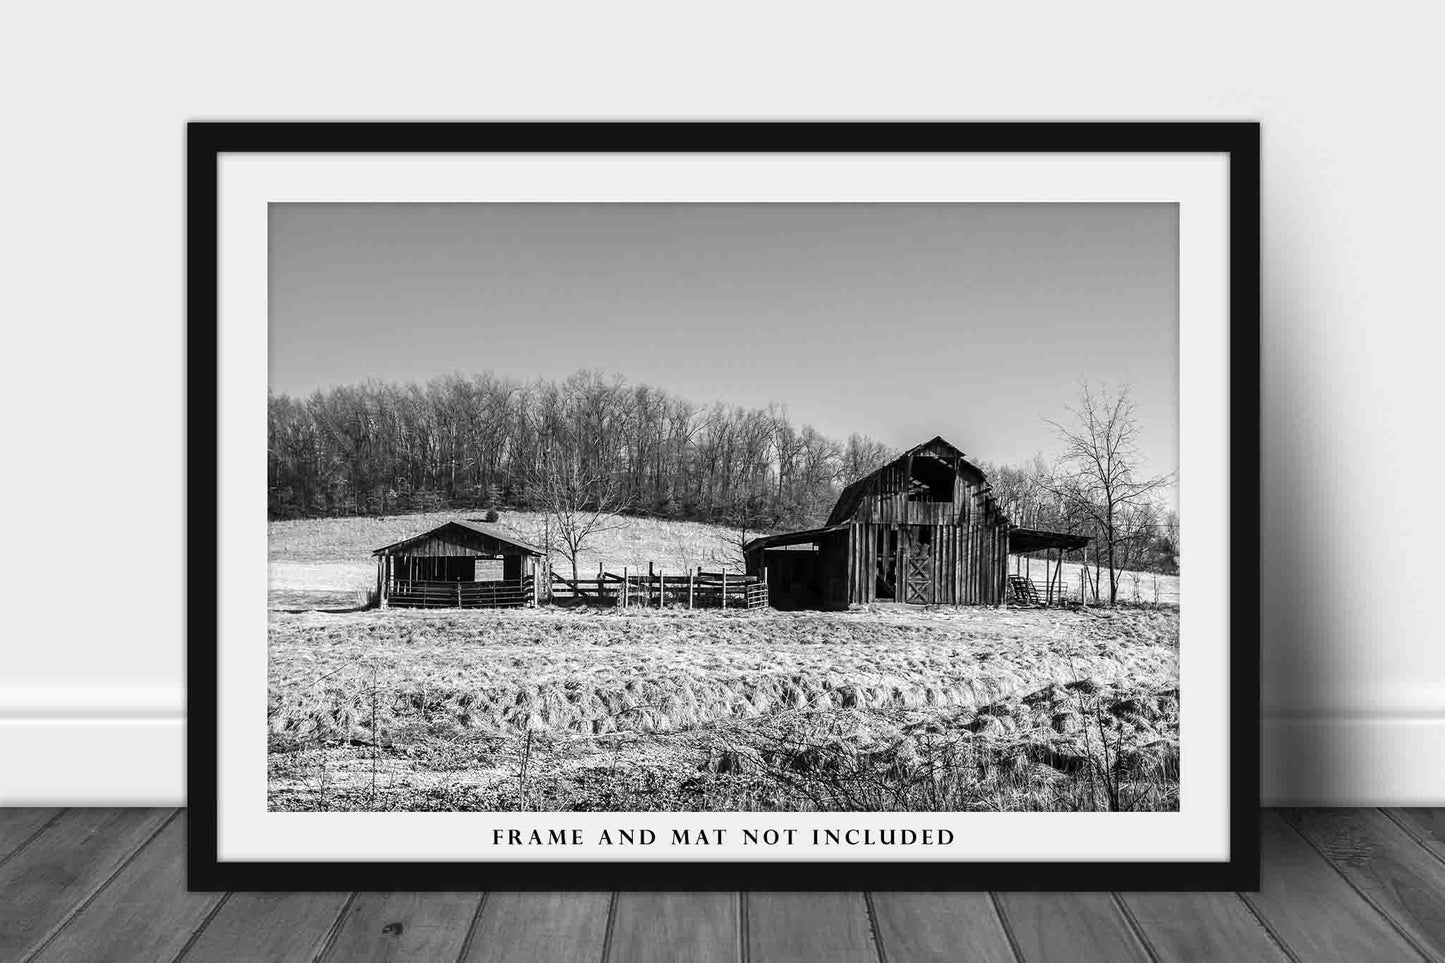 Black and White Photography Print - Picture of Old Barn with Pen and Corral in Western Arkansas Country Style Home Decor 4x6 to 24x36